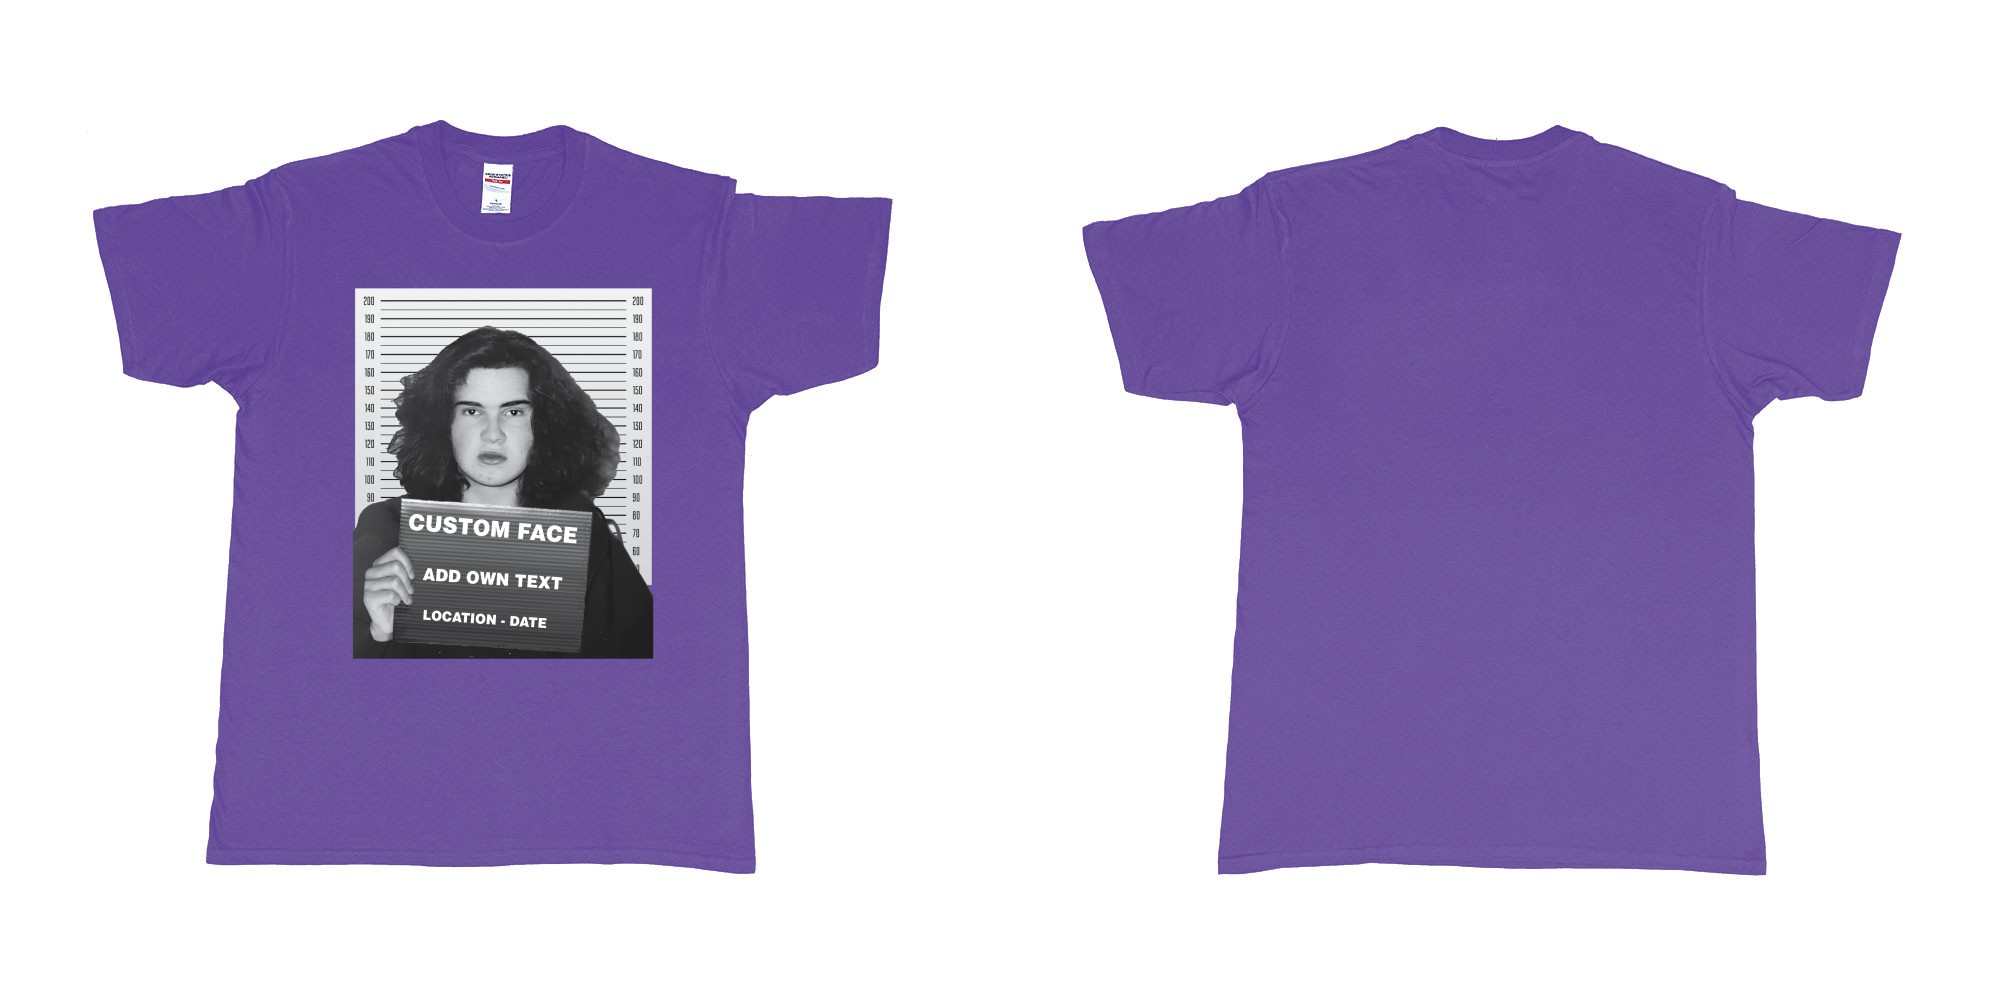 Custom tshirt design jimmy carr arrested bali mugshot in fabric color purple choice your own text made in Bali by The Pirate Way